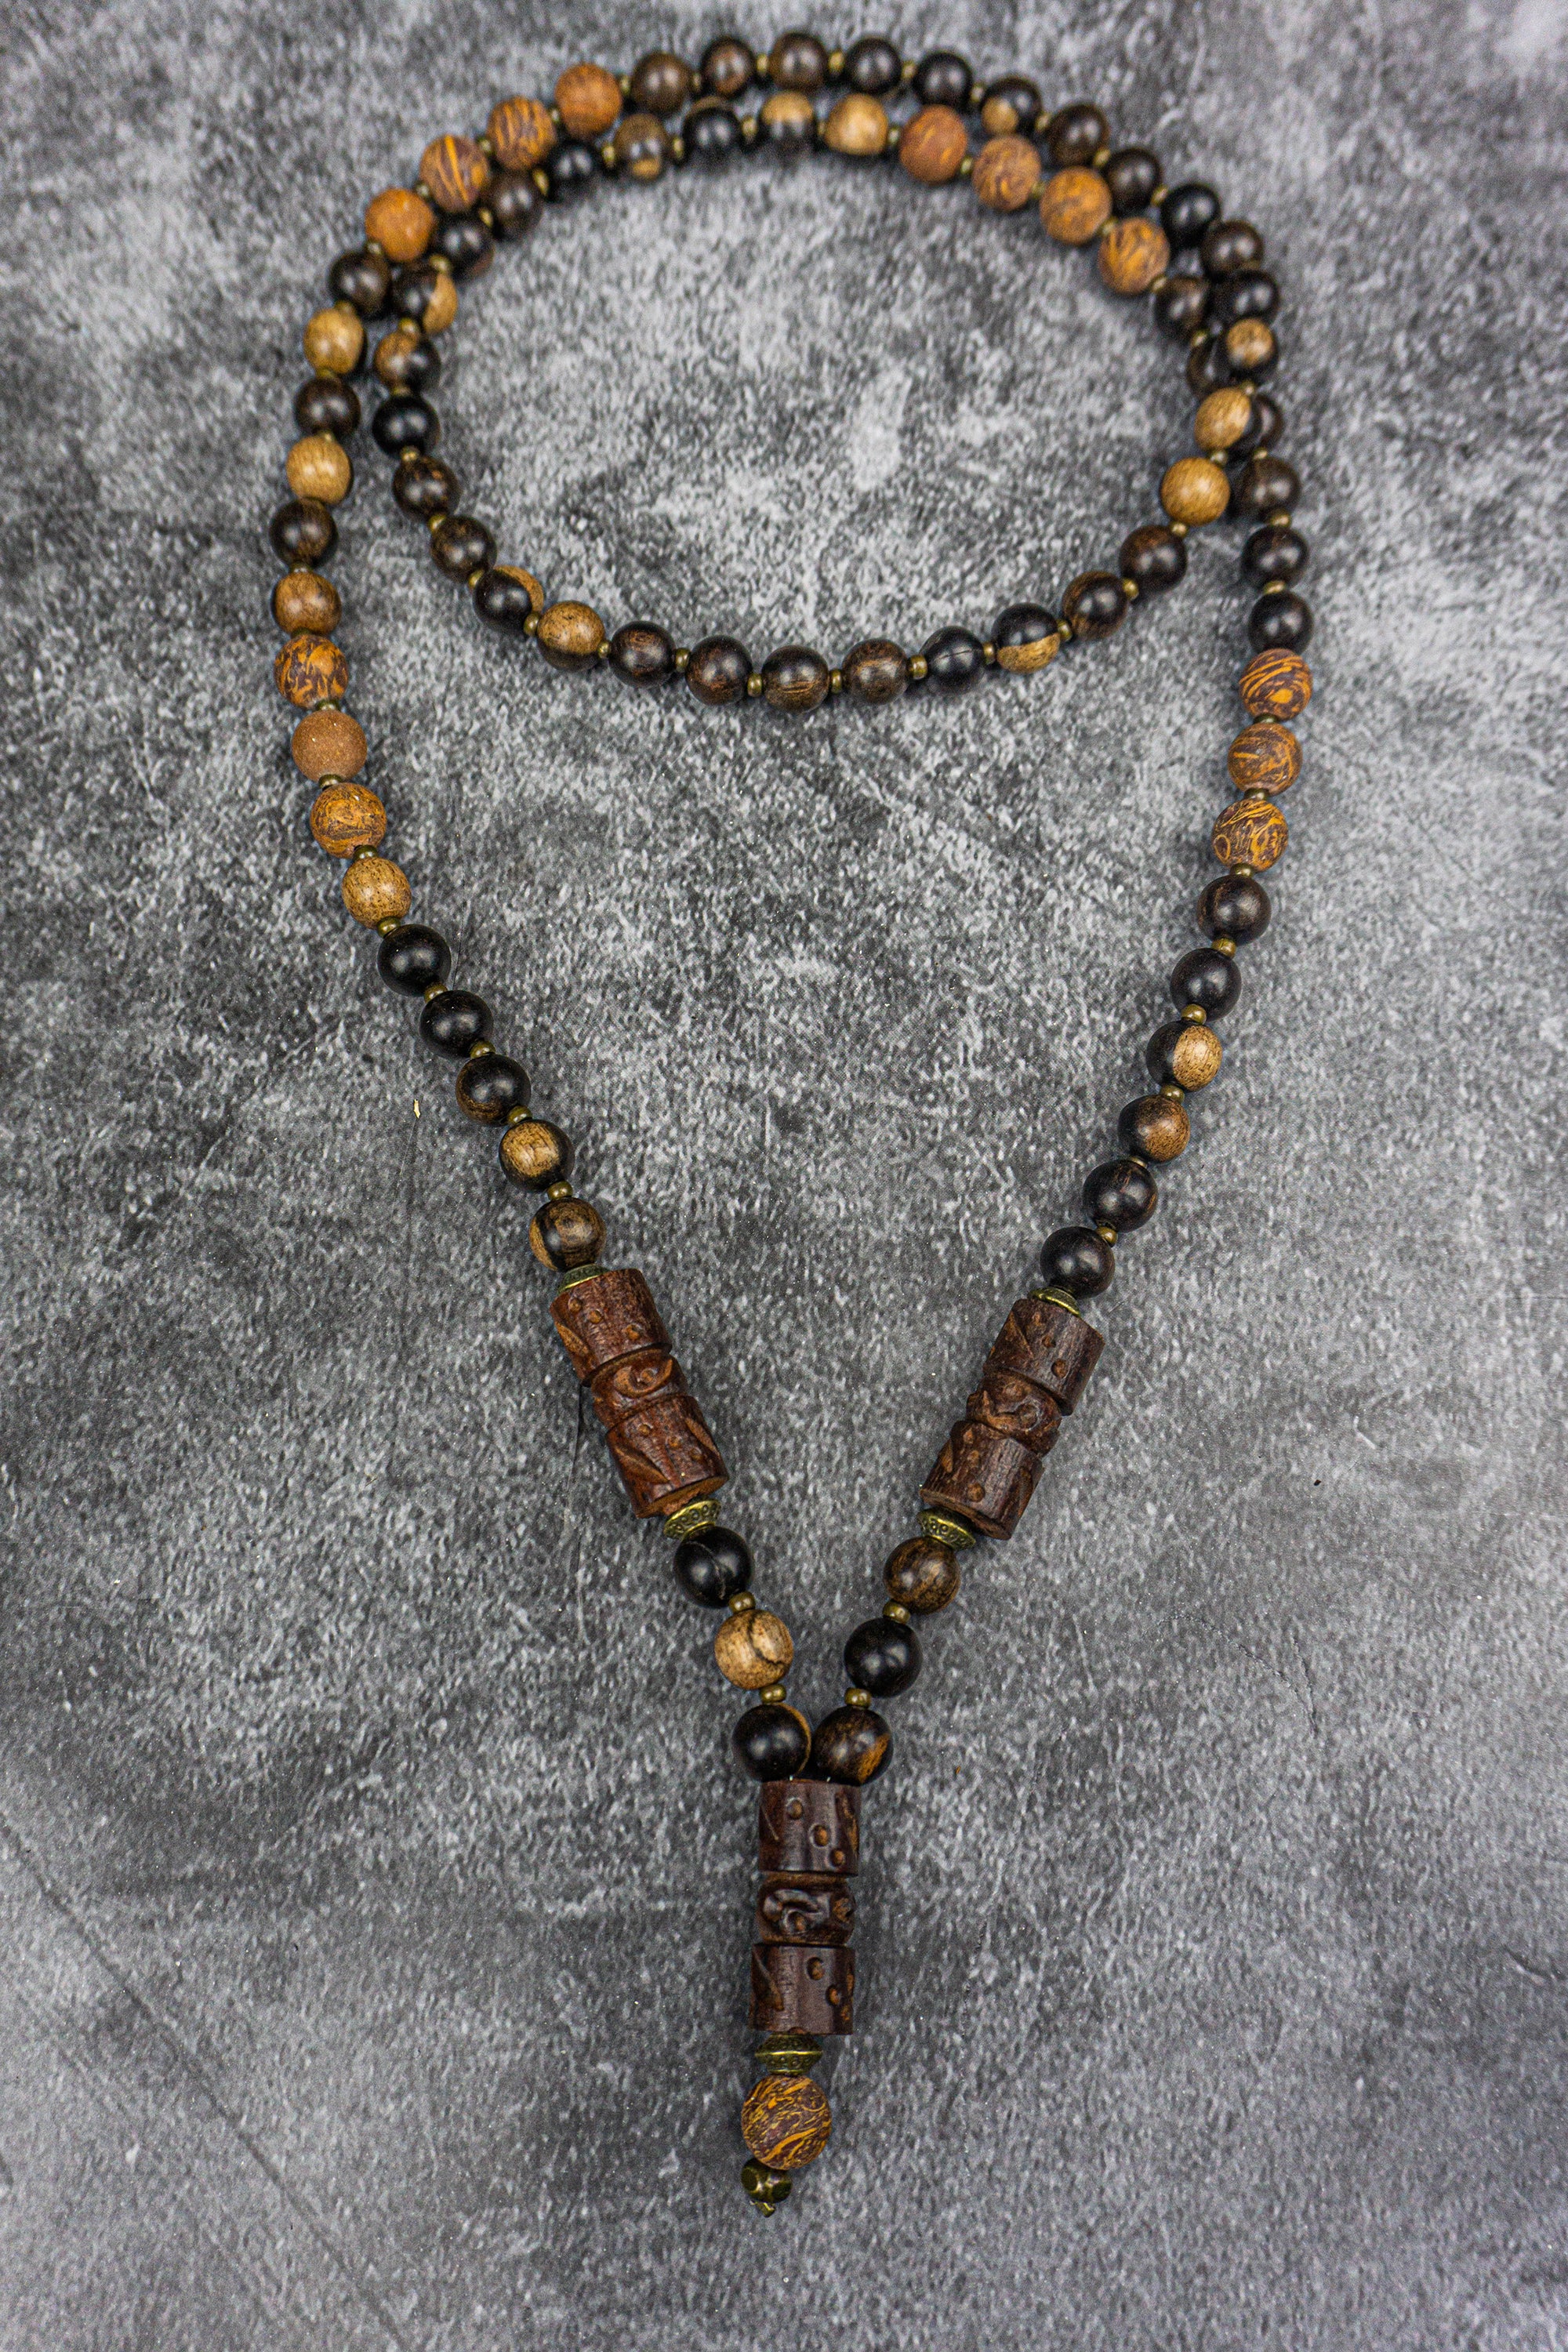 dark ebony wood and elephant skin beaded necklace with bronze details and three carved ebony wood central pieces